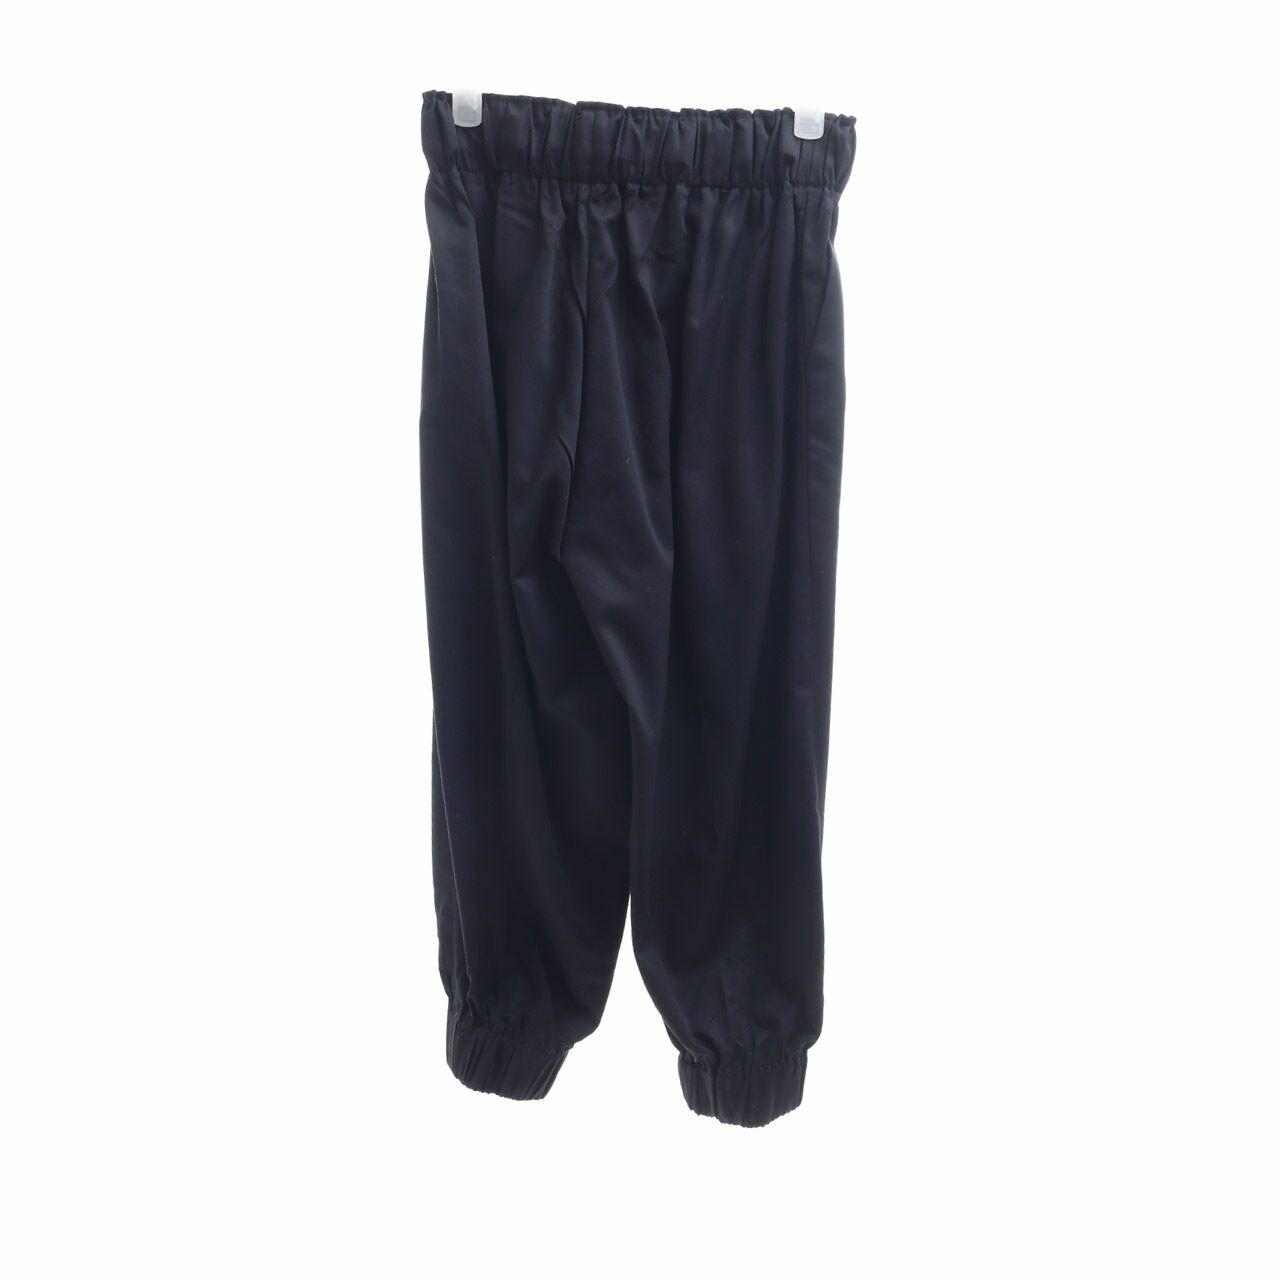 Noho The Label Black Cropped Pants